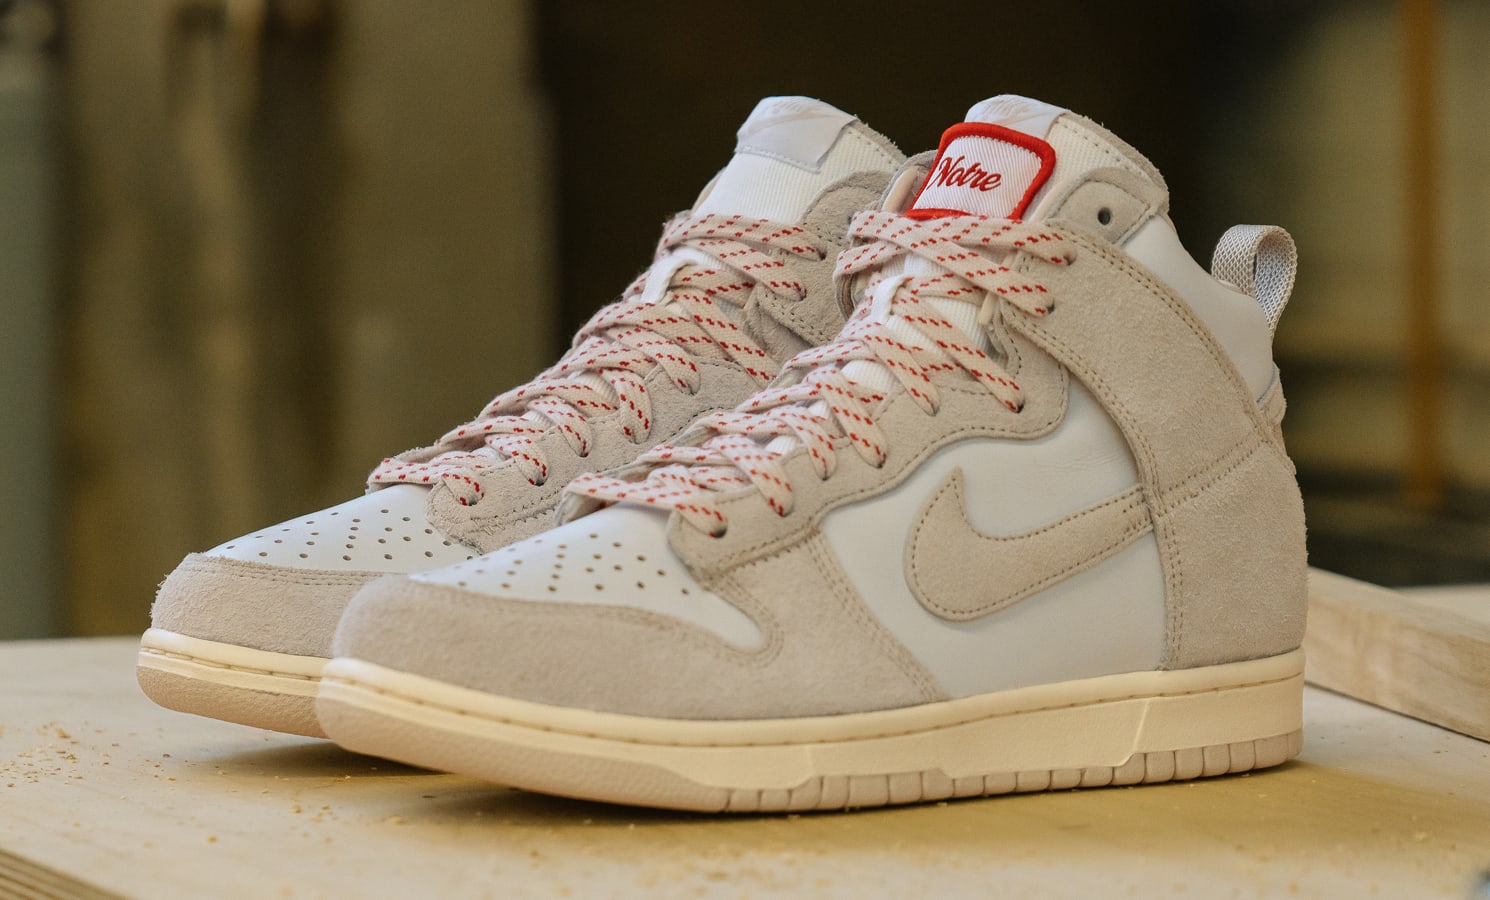 Notre x Nike Dunk High Is a Tribute to 